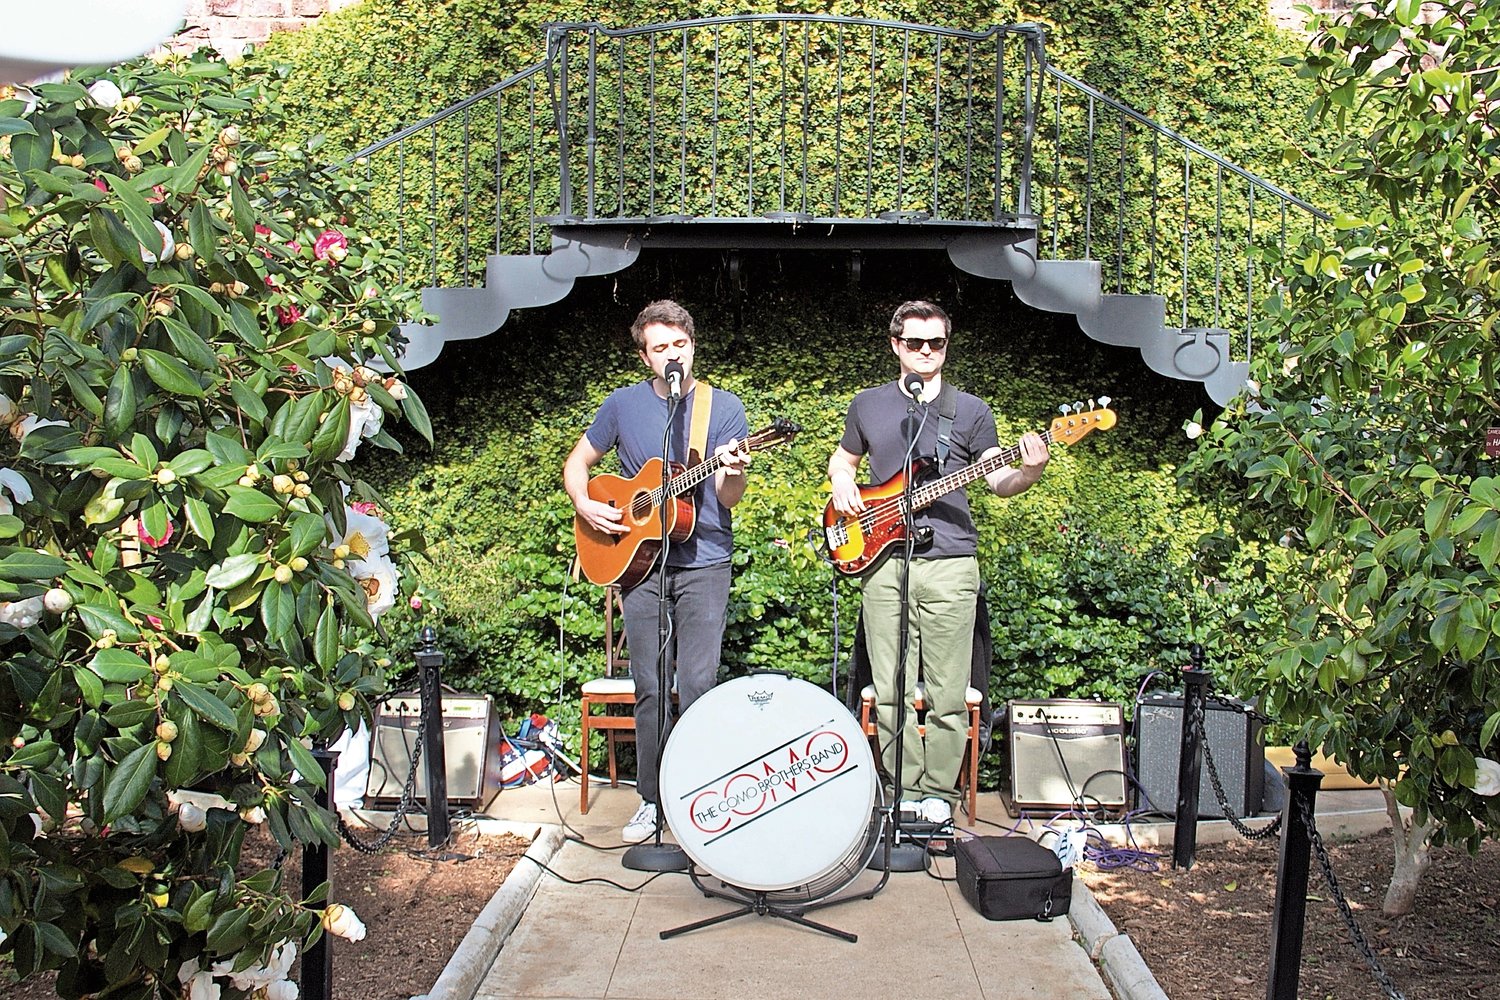 The Long Island indie band the Como Brothers performed inside the Camellia House at the festival on Feb. 18. at Planting Fields Arboretum.